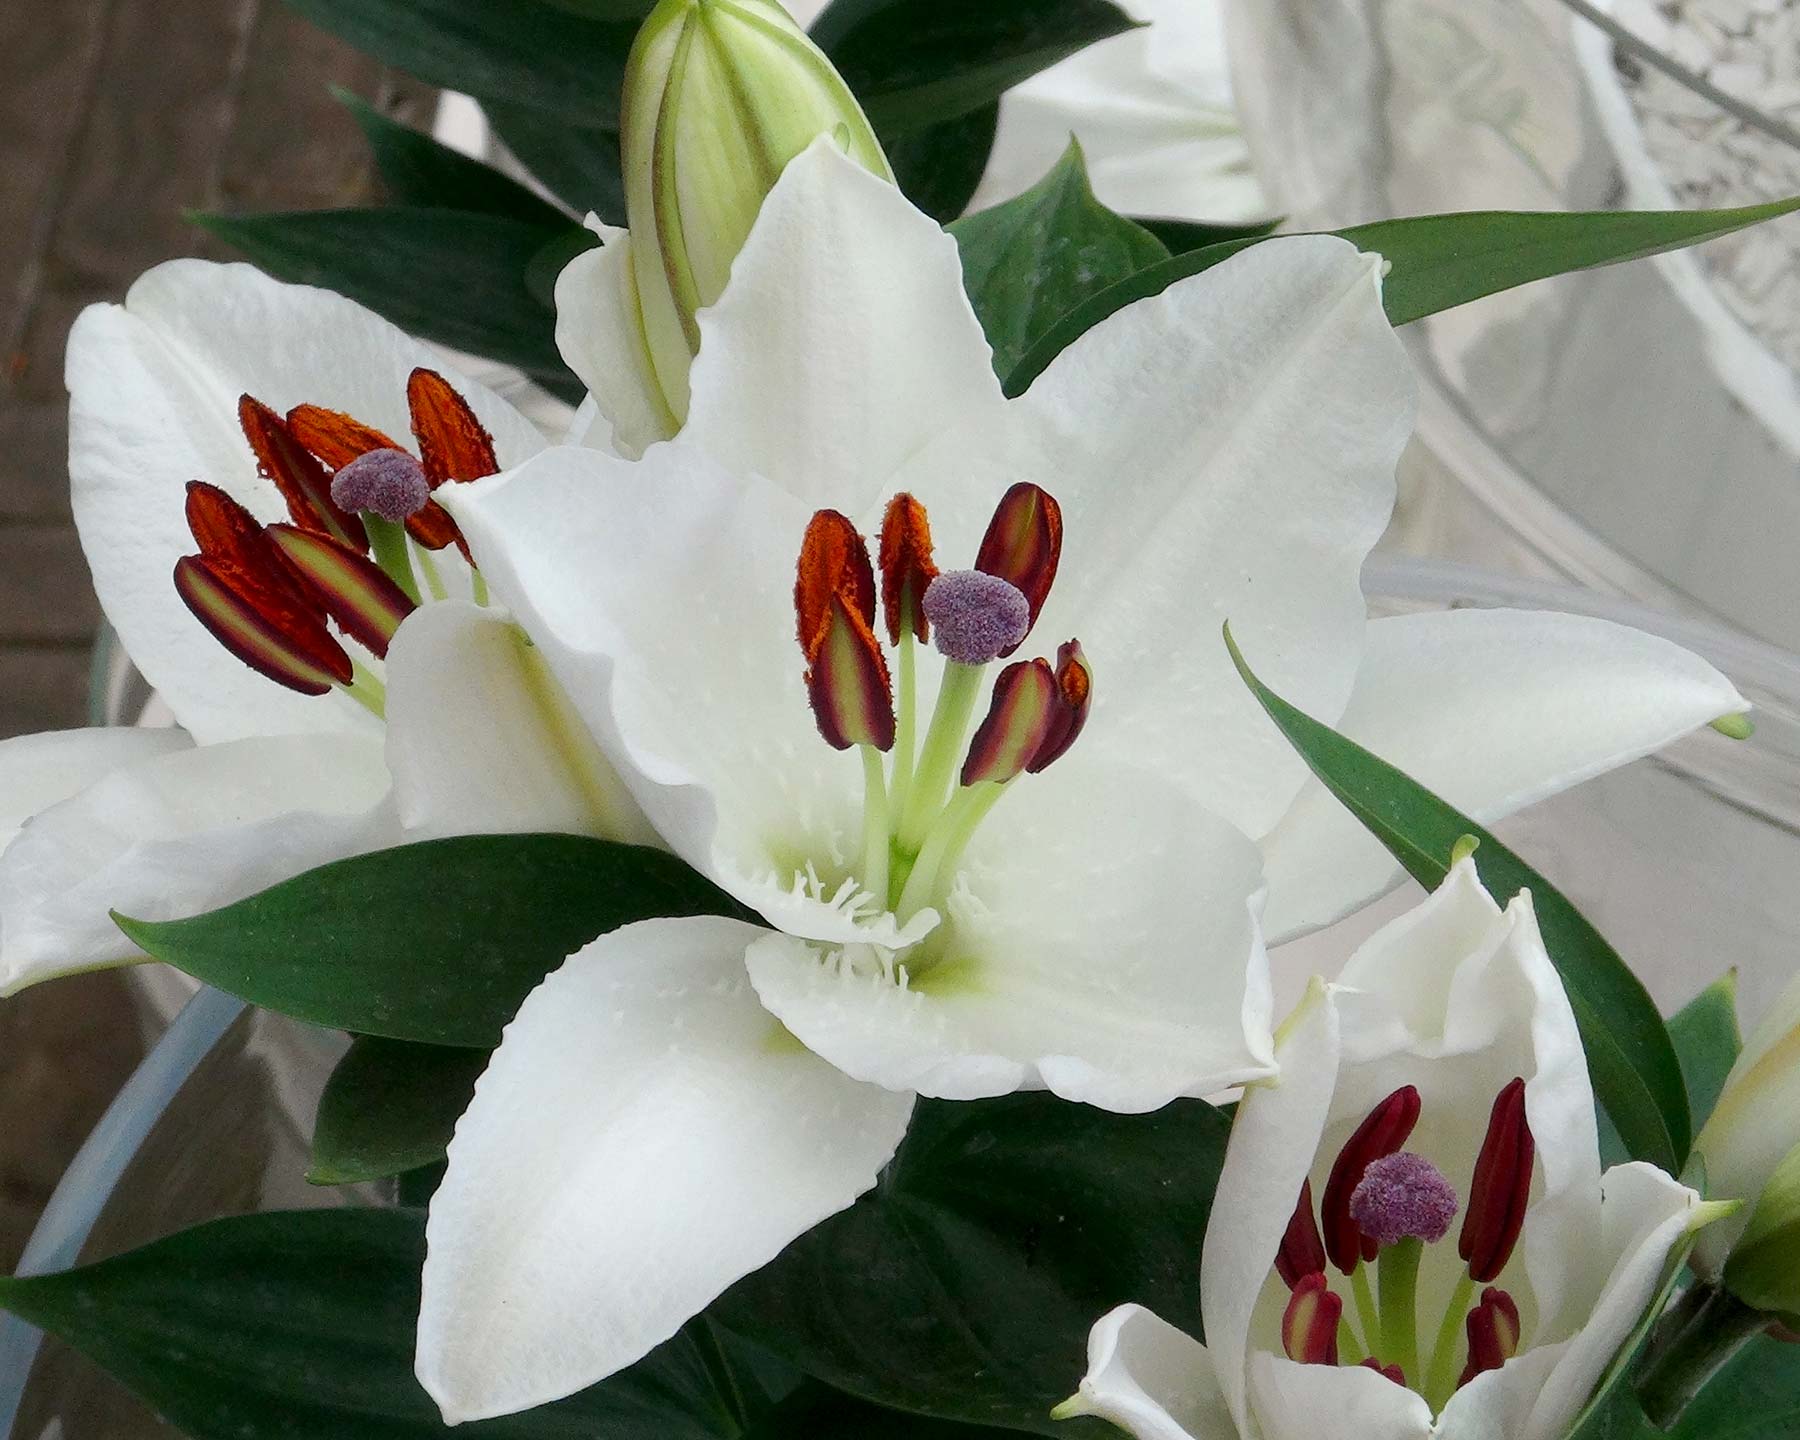 Oriental hybrid lilies - Hybrid with pure white flowers